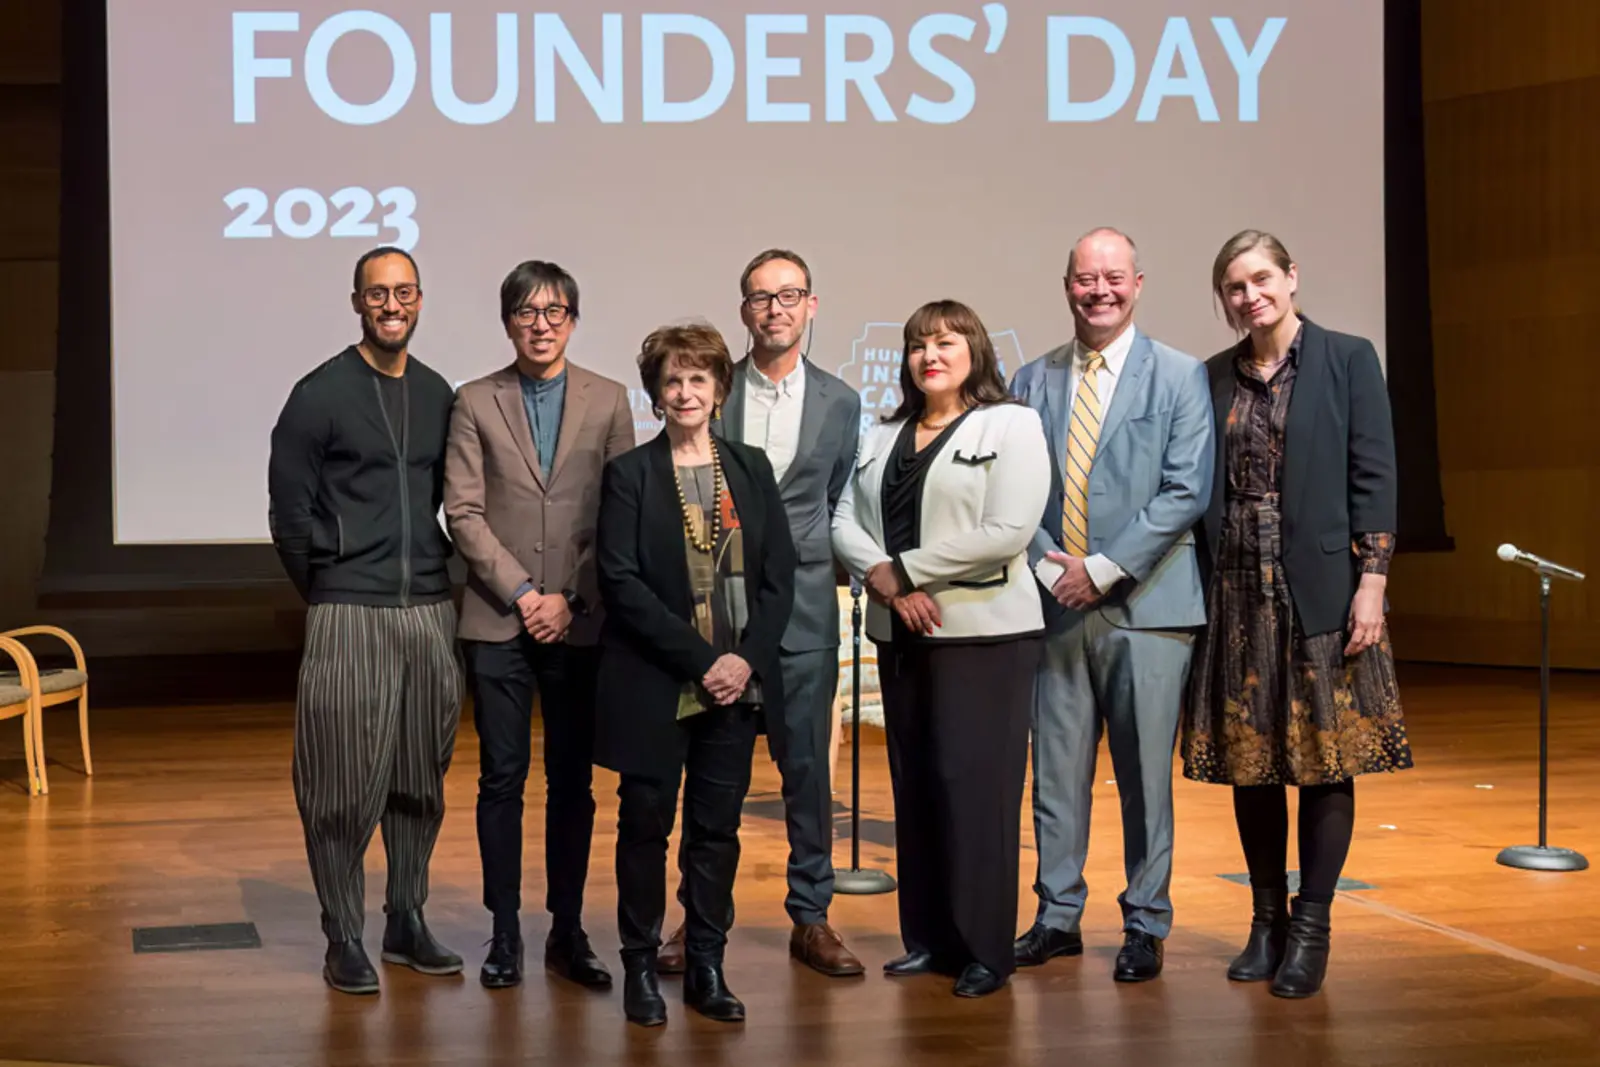 Presenters at the 2023 Founders’ Day stand together on a stage.